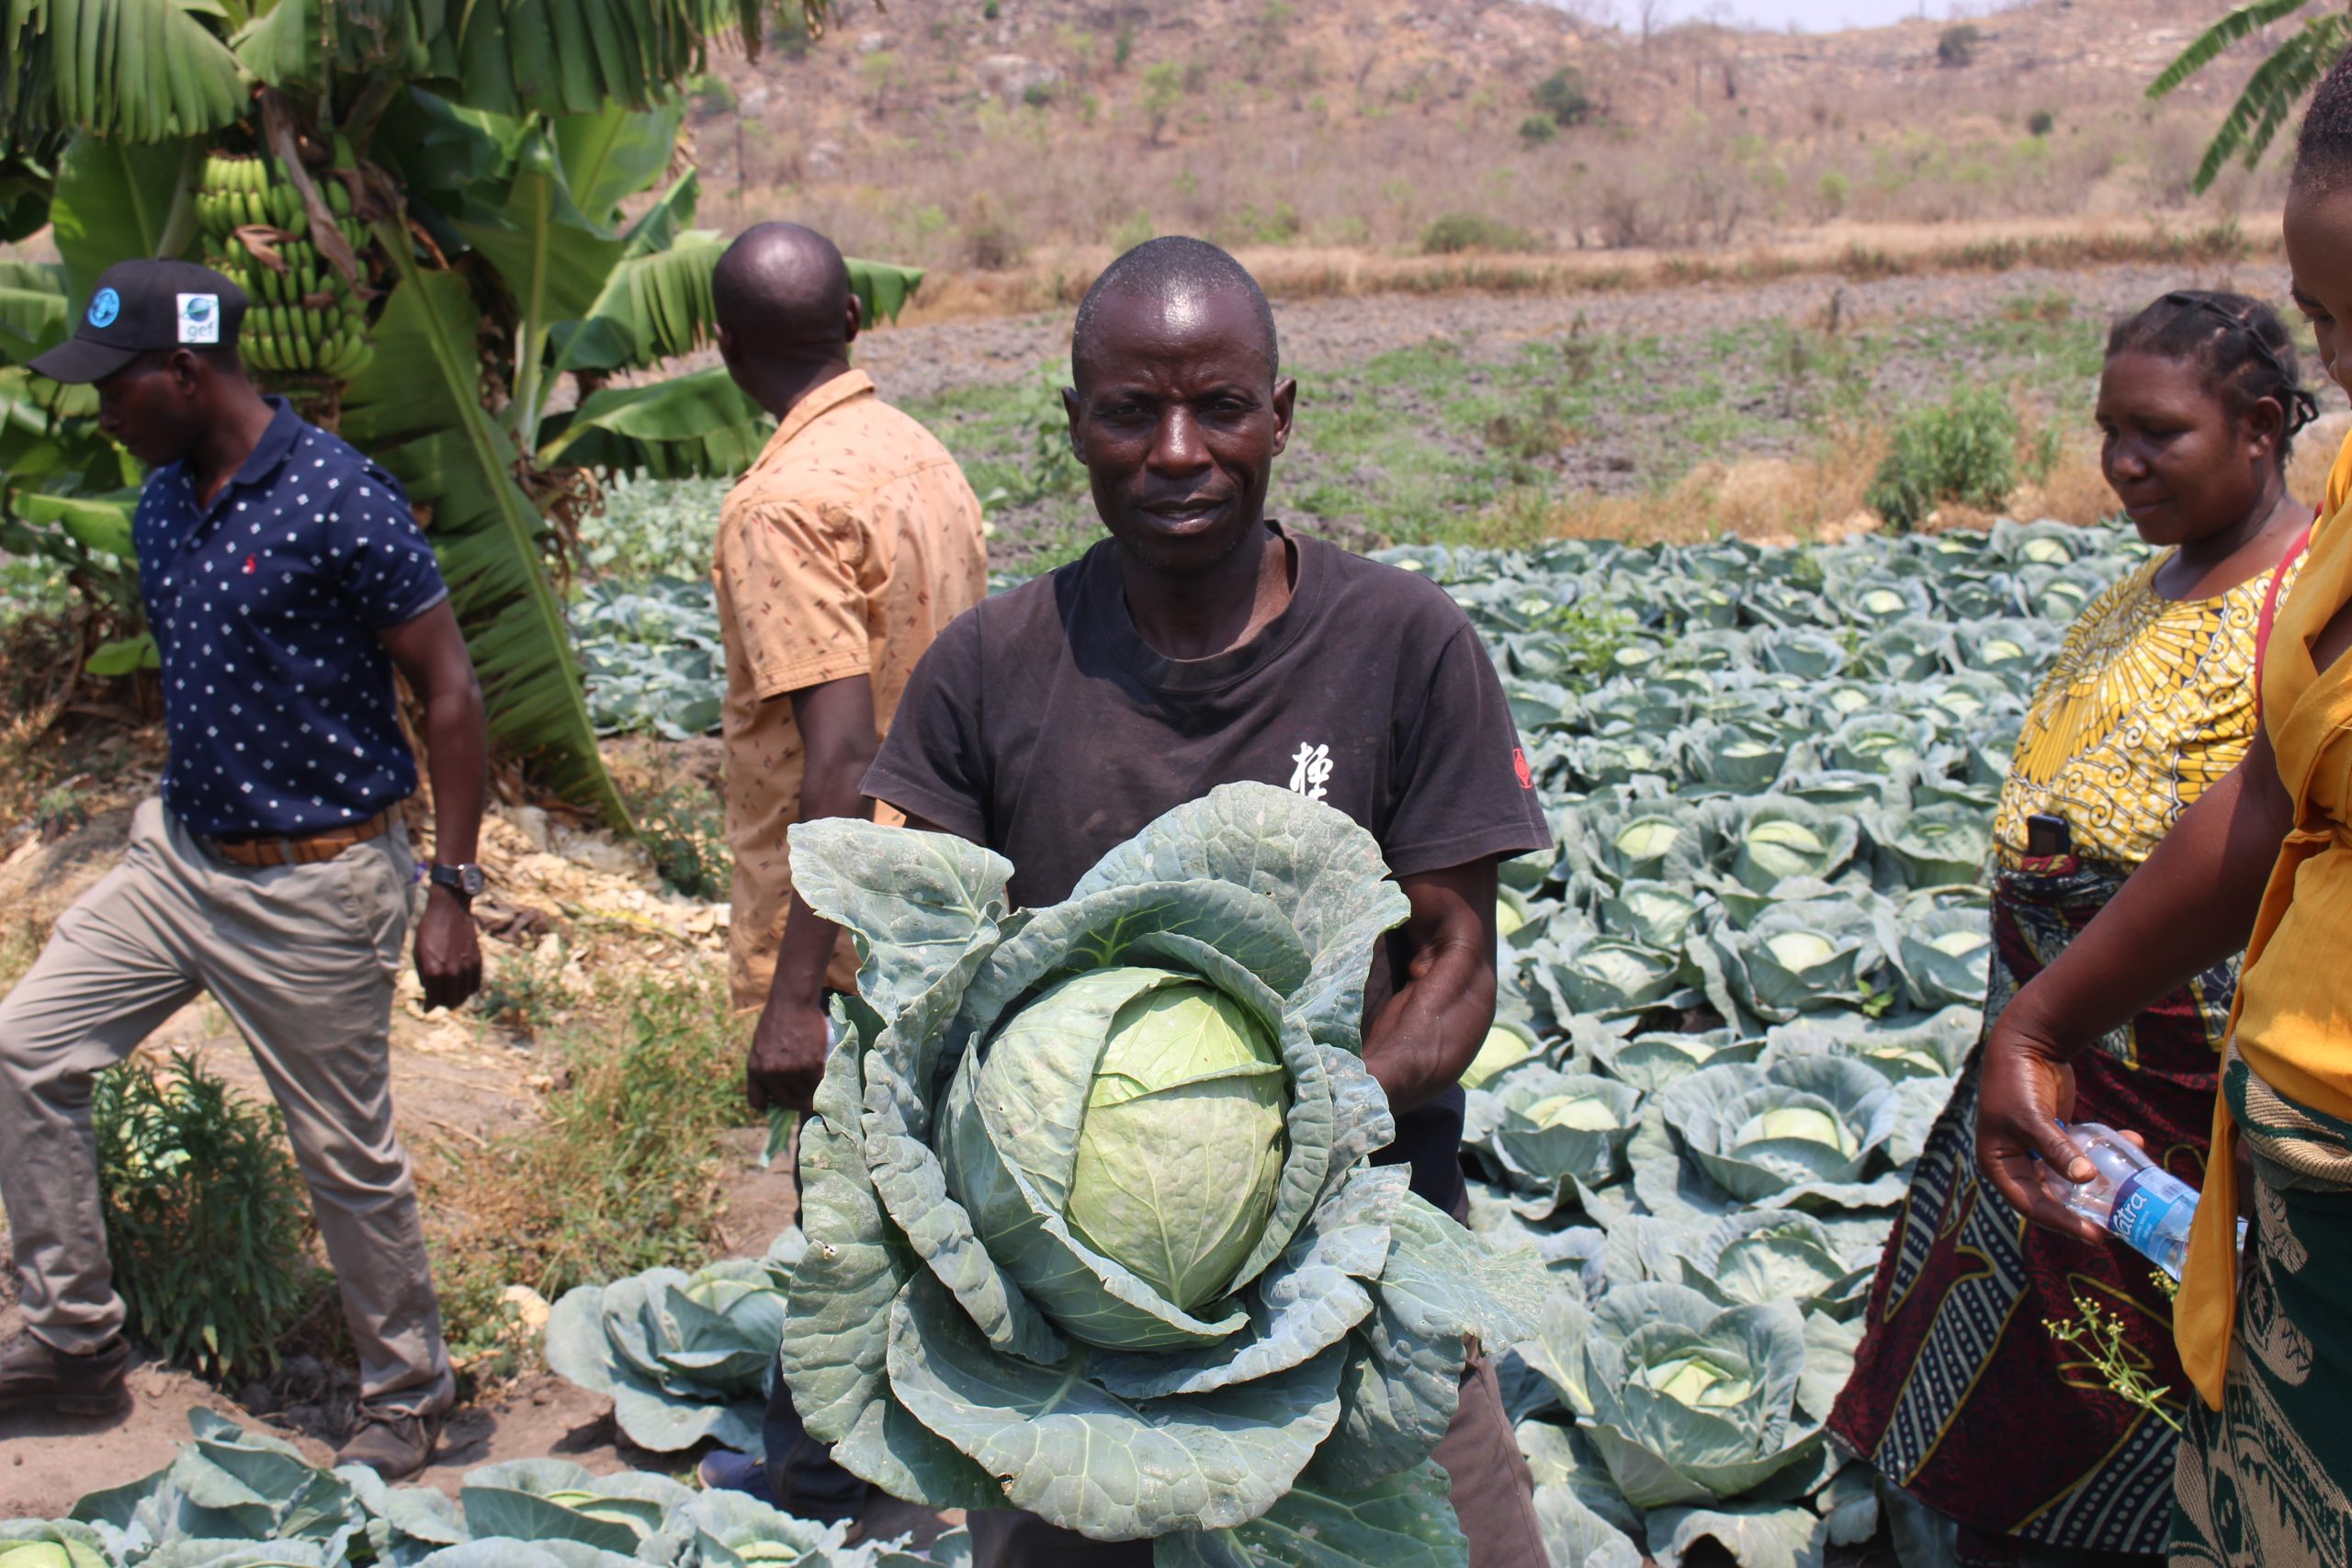 Emmanuel is showing how he has managed to produce good quality organic cabbage